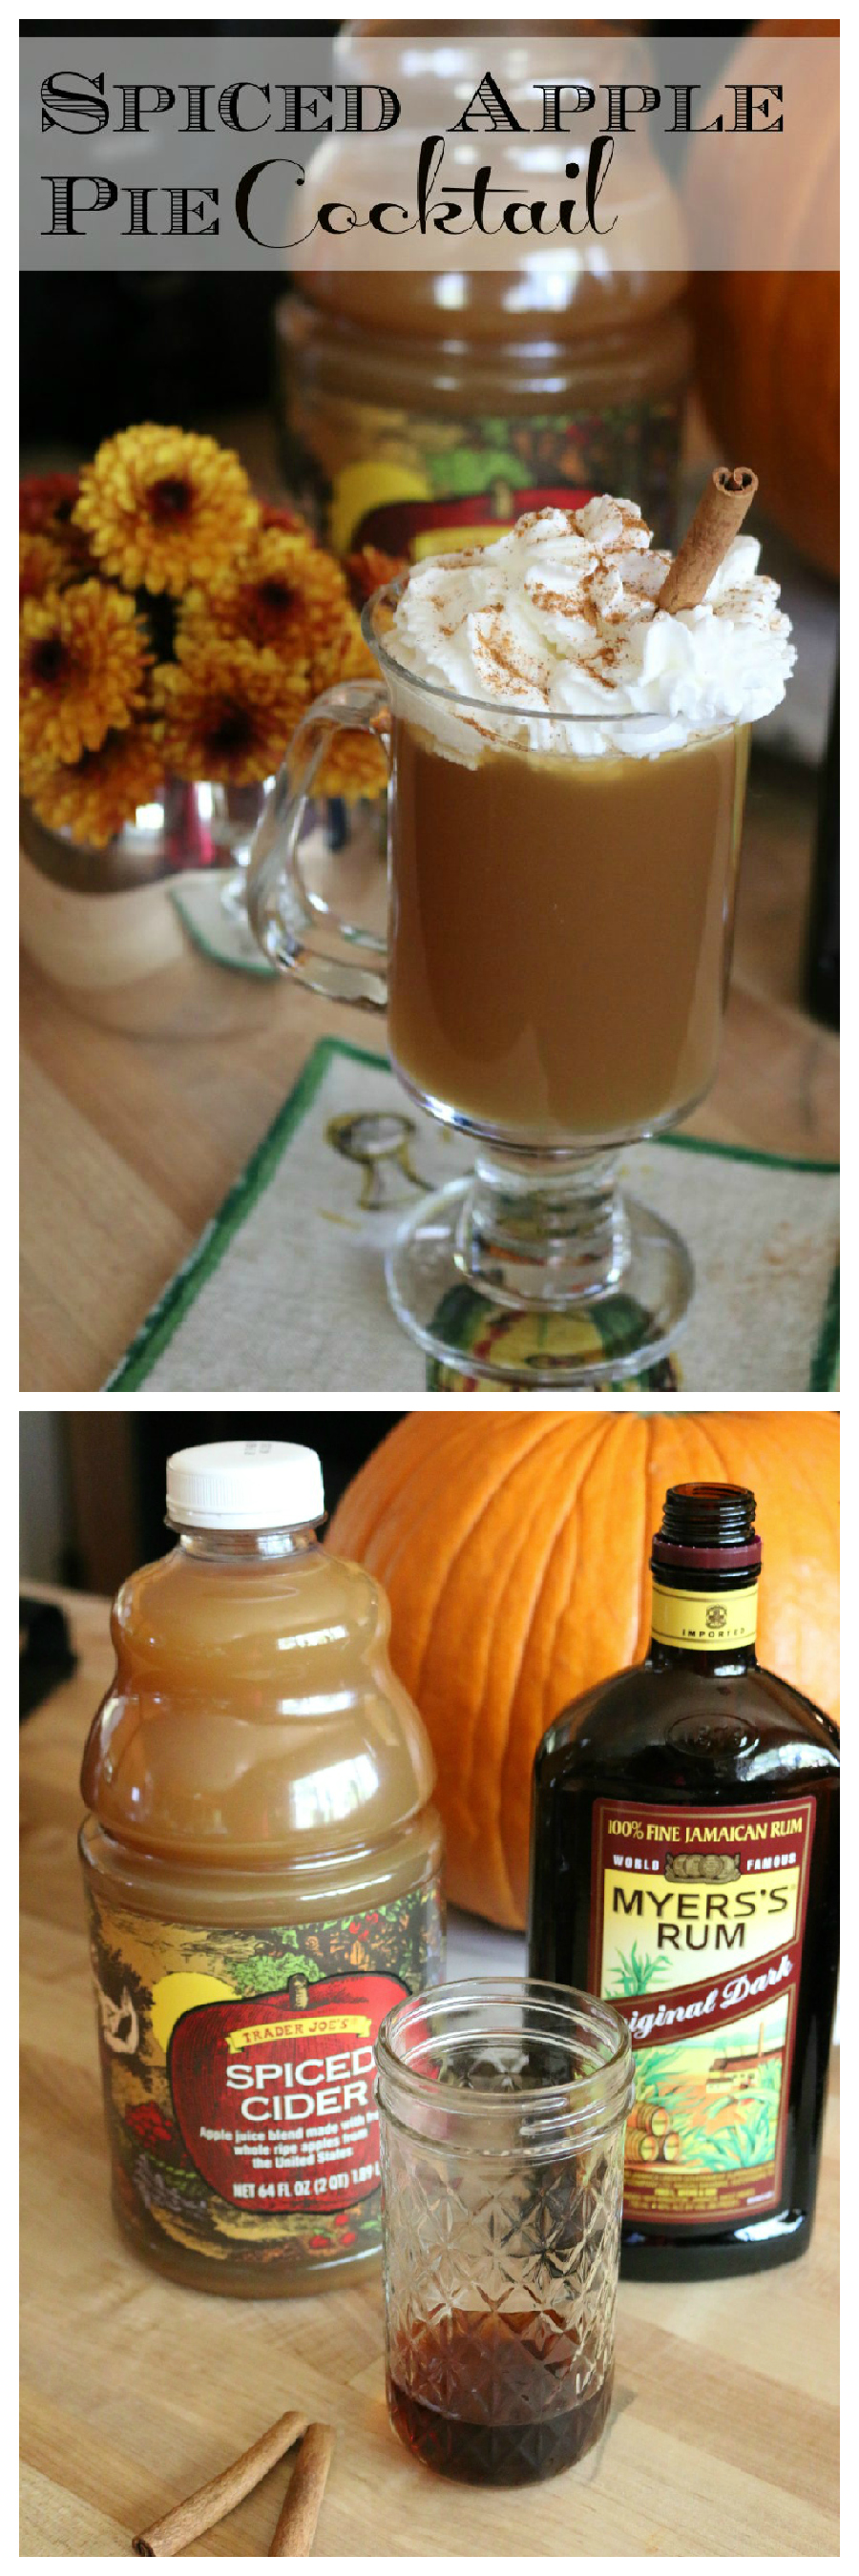 Spiced Apple Pie Cocktail Recipe perfect for a chilly evening or great addition to your Thanksgiving menu. | CeceliasGoodStuff.com | Good Food for Good People